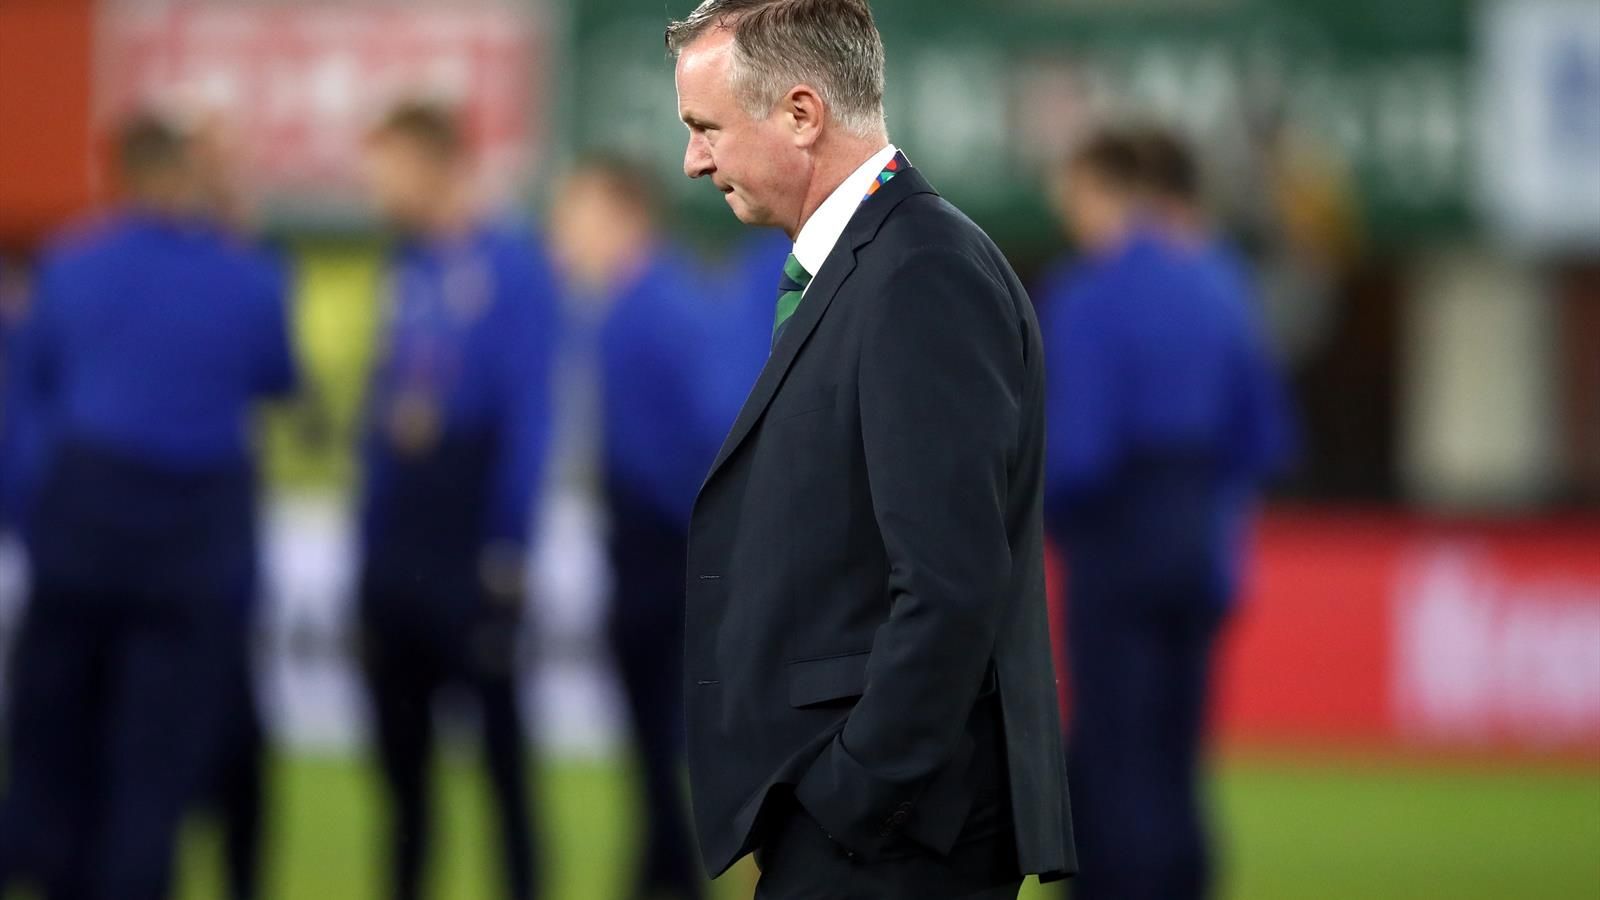 Michael O'Neill is COVID-19 positive  